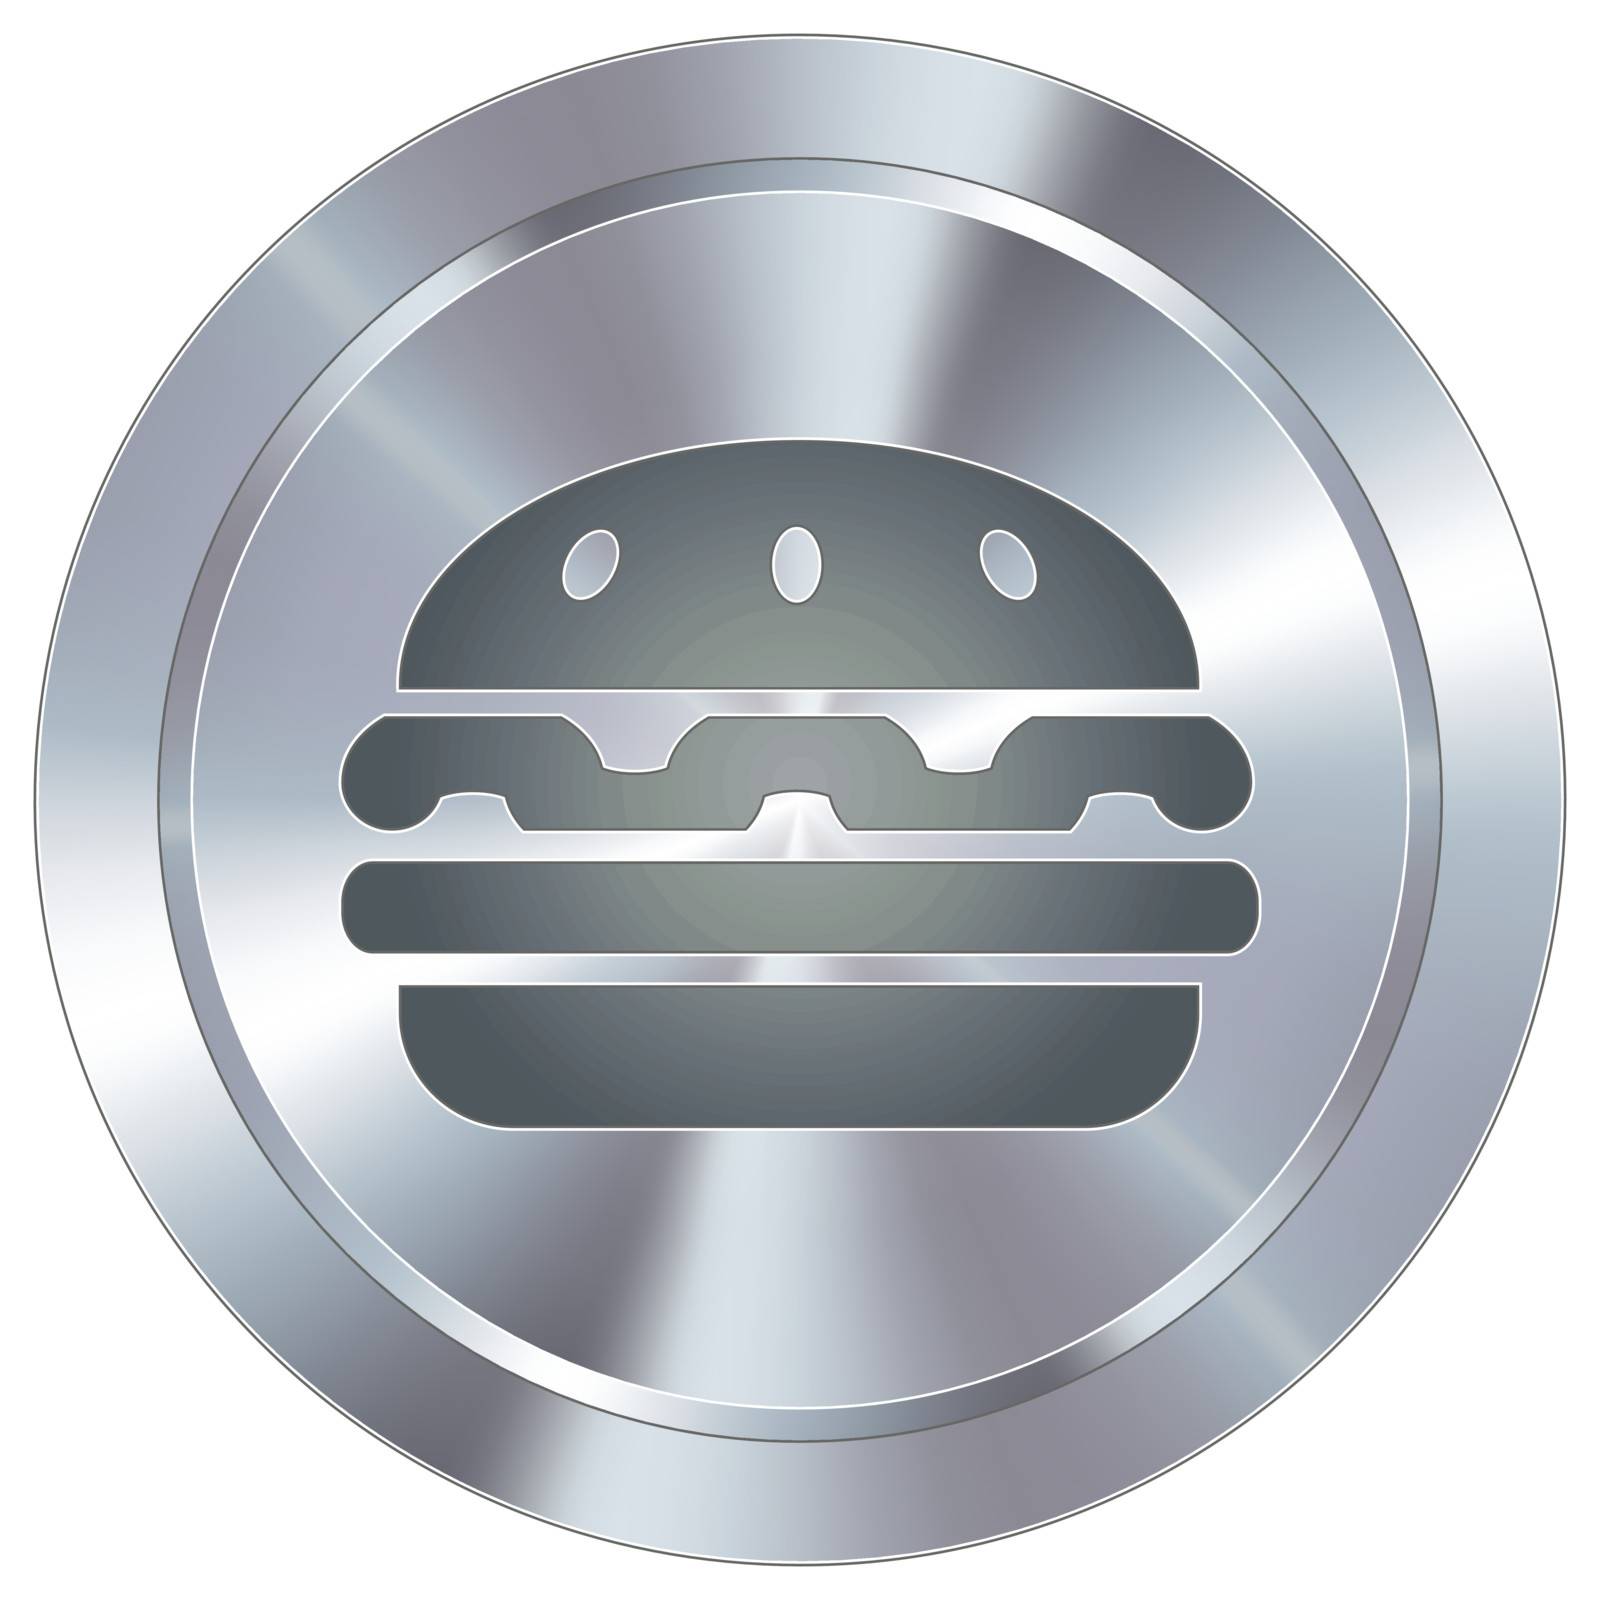 Hamburger industrial button by lhfgraphics